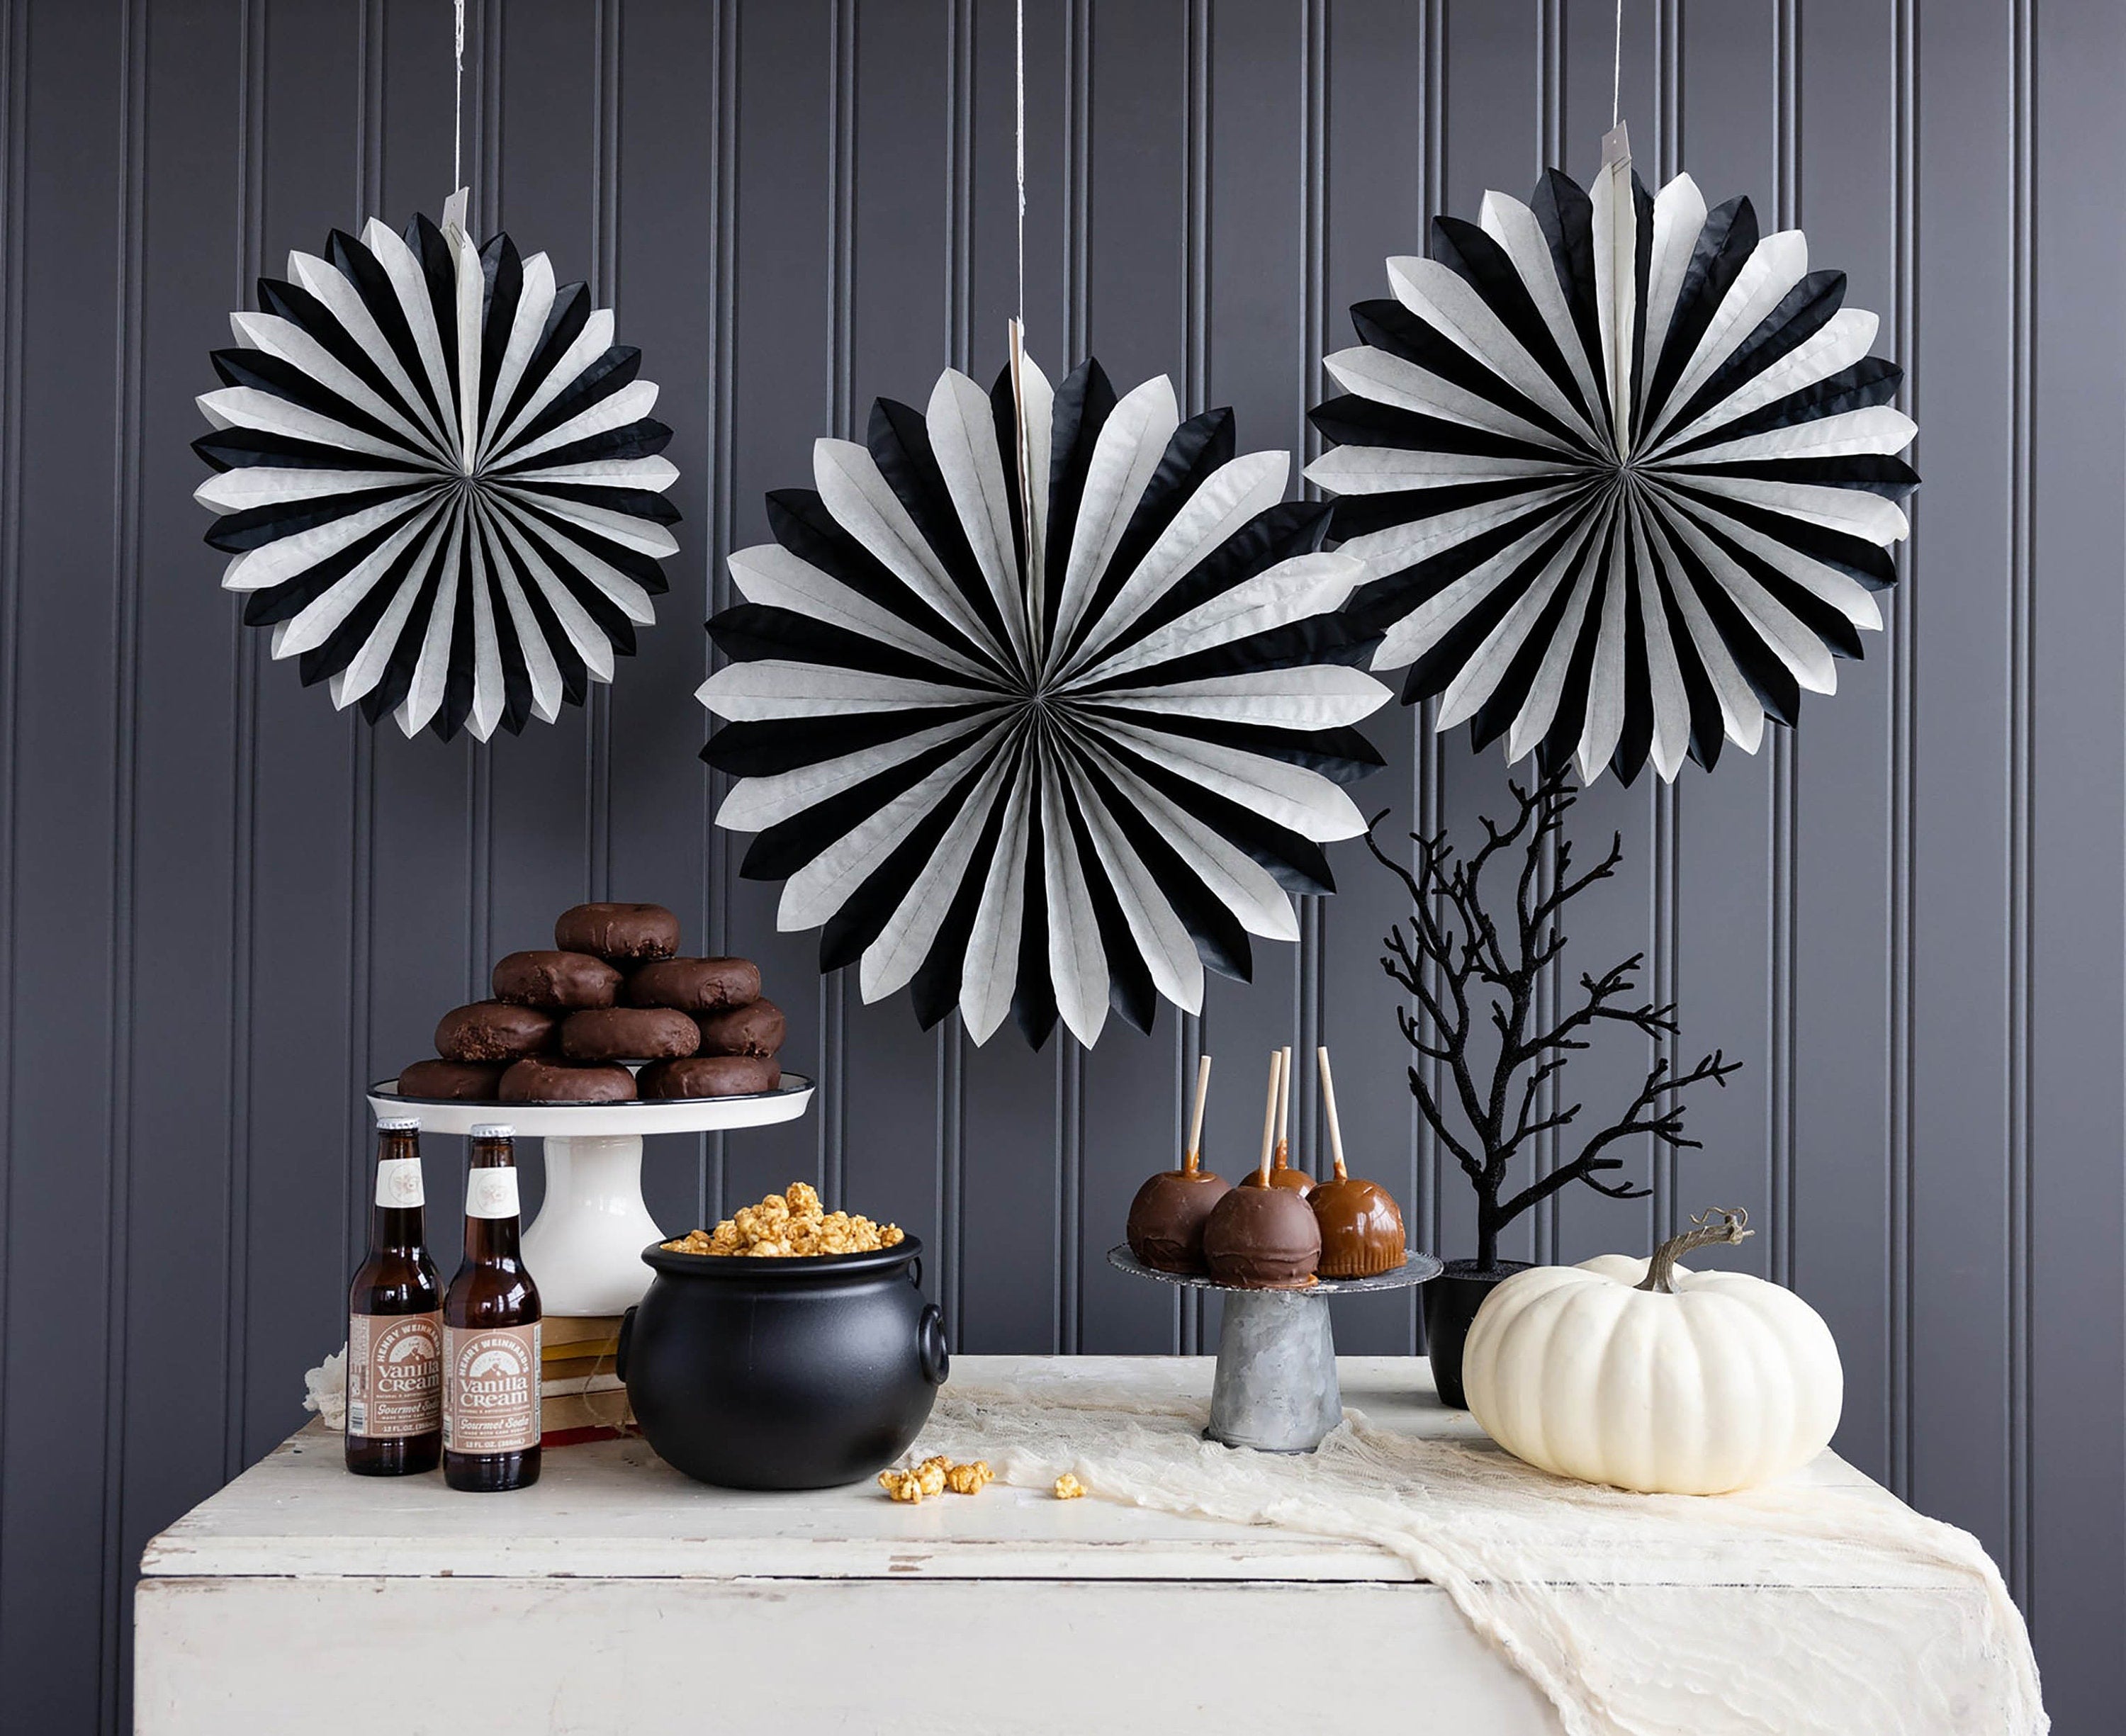 Black and White Party Decorations | Halloween Party Decorations - Retro Halloween Decor - Black Party Decorations - Decorative Paper Fans